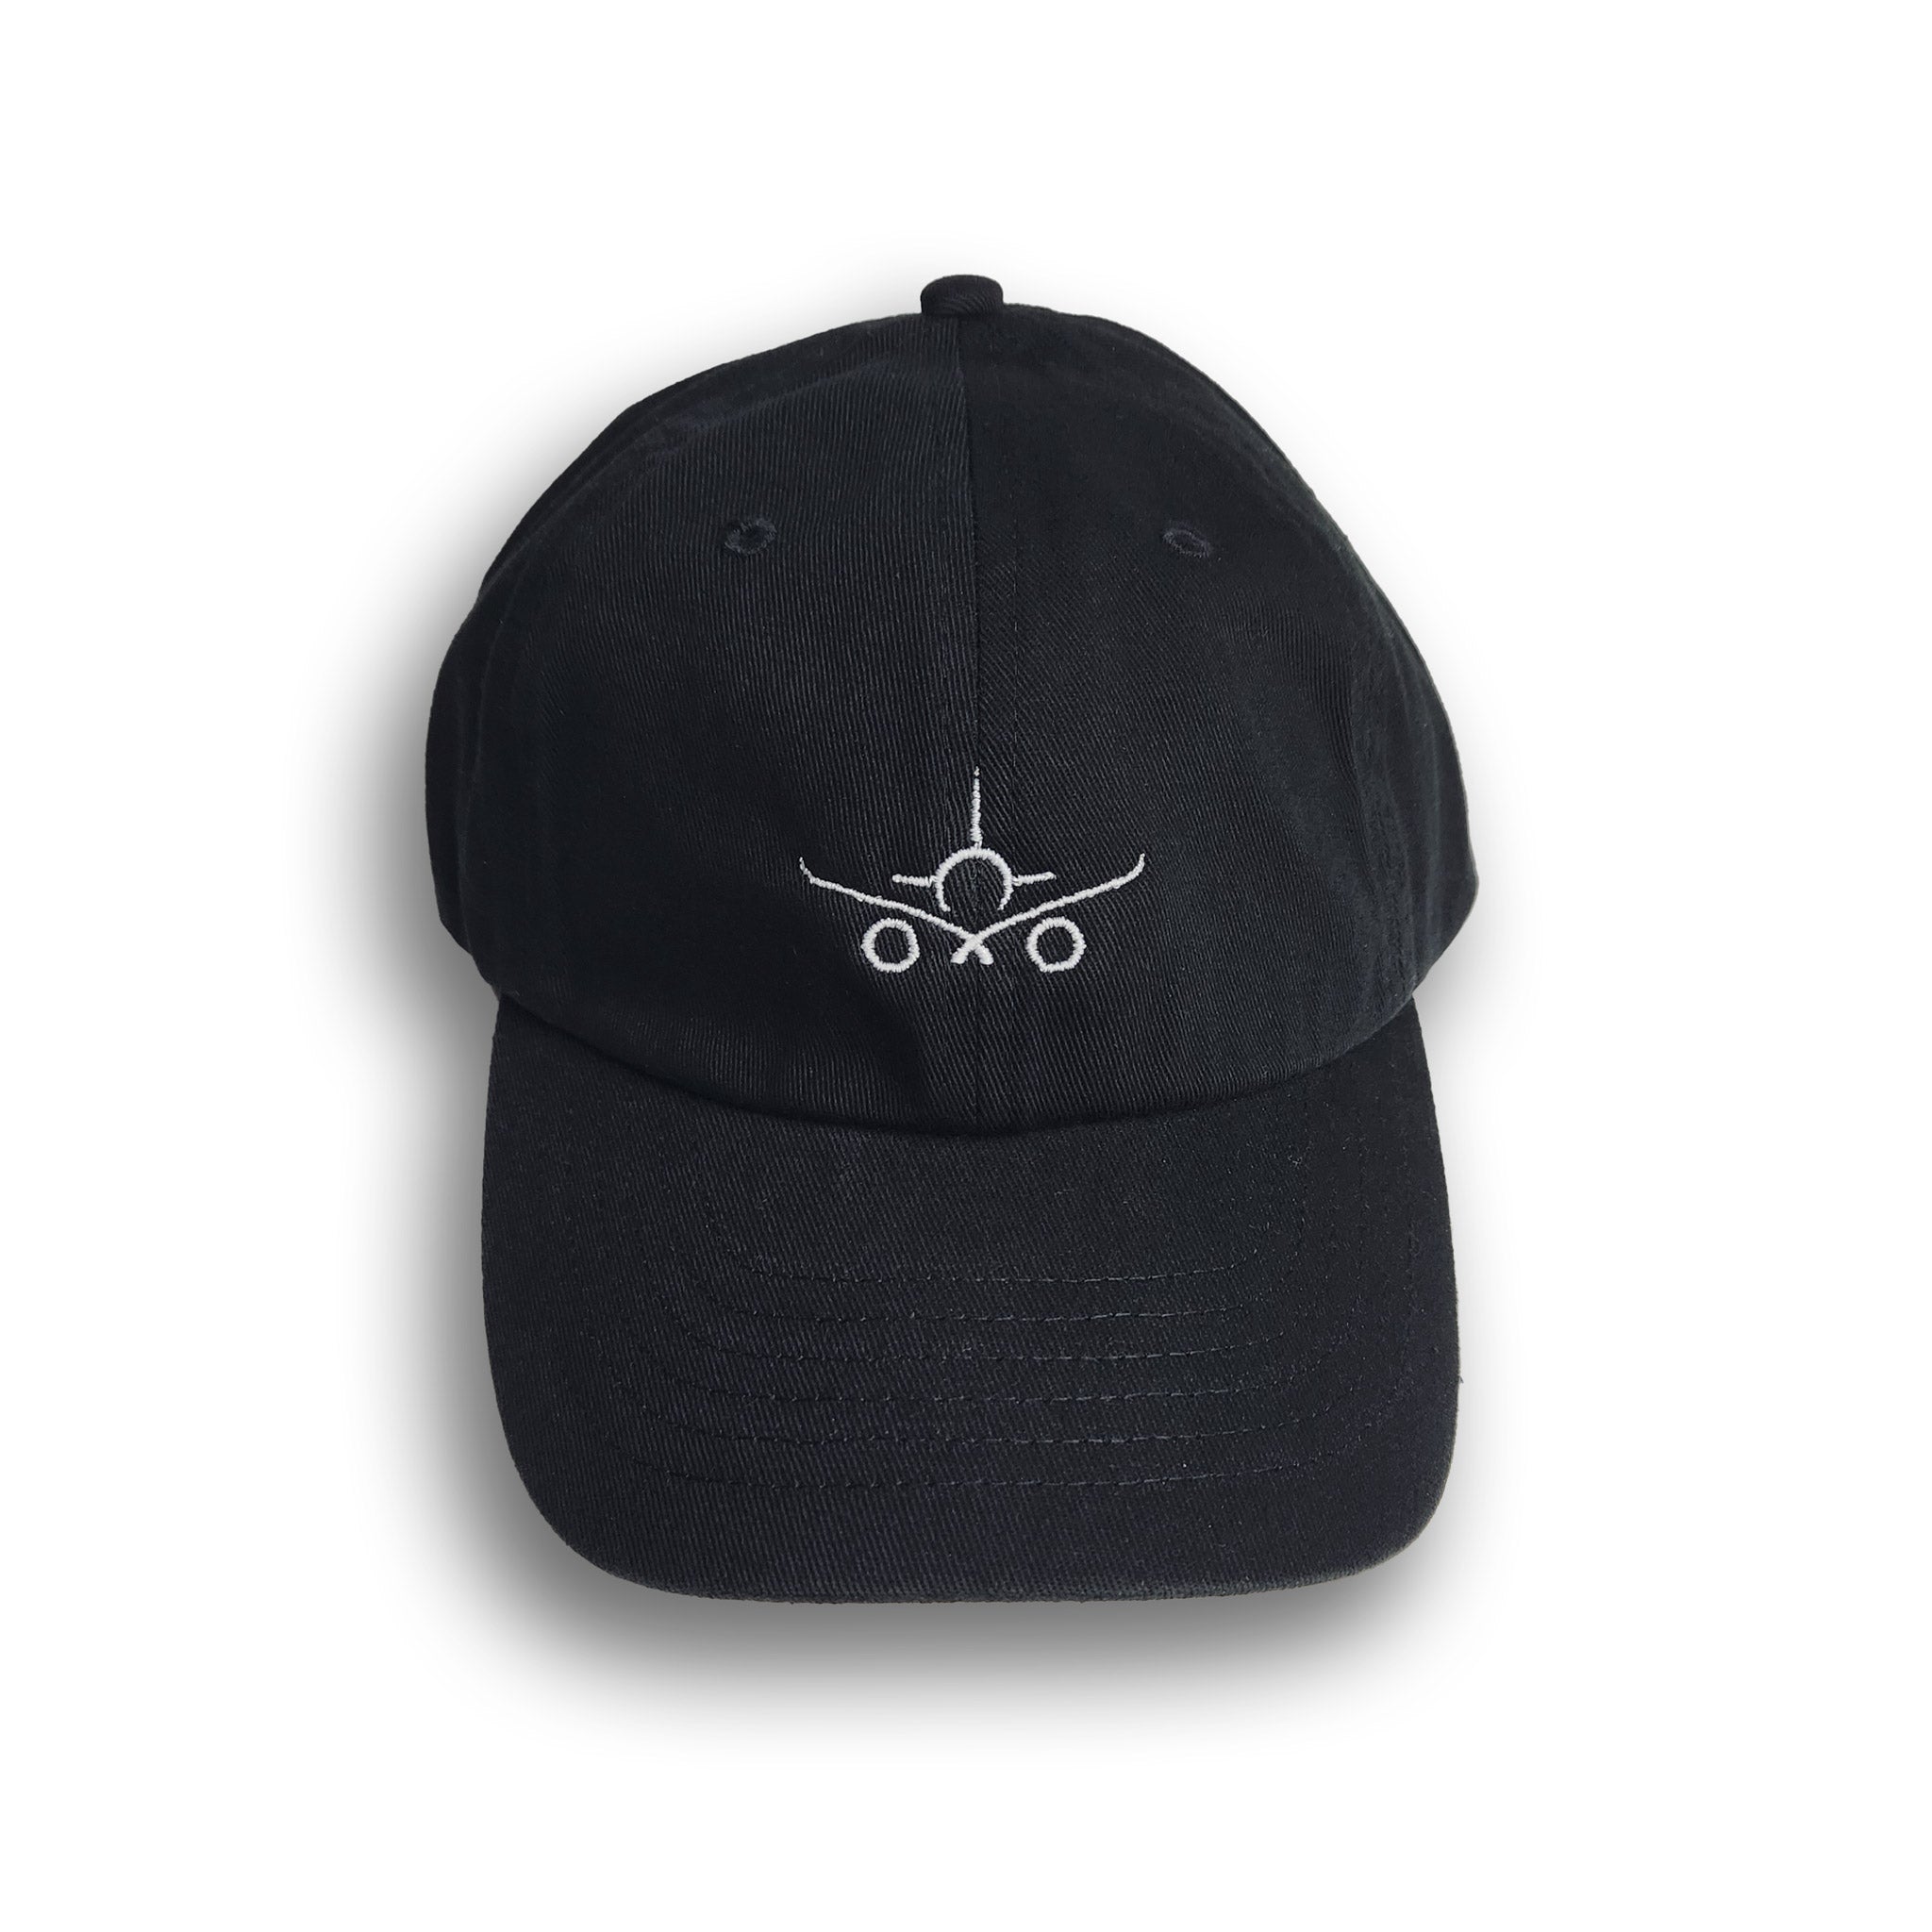 "The Classic" - Unstructured Black Aviation Dad Cap w/ White Embroidered Logo